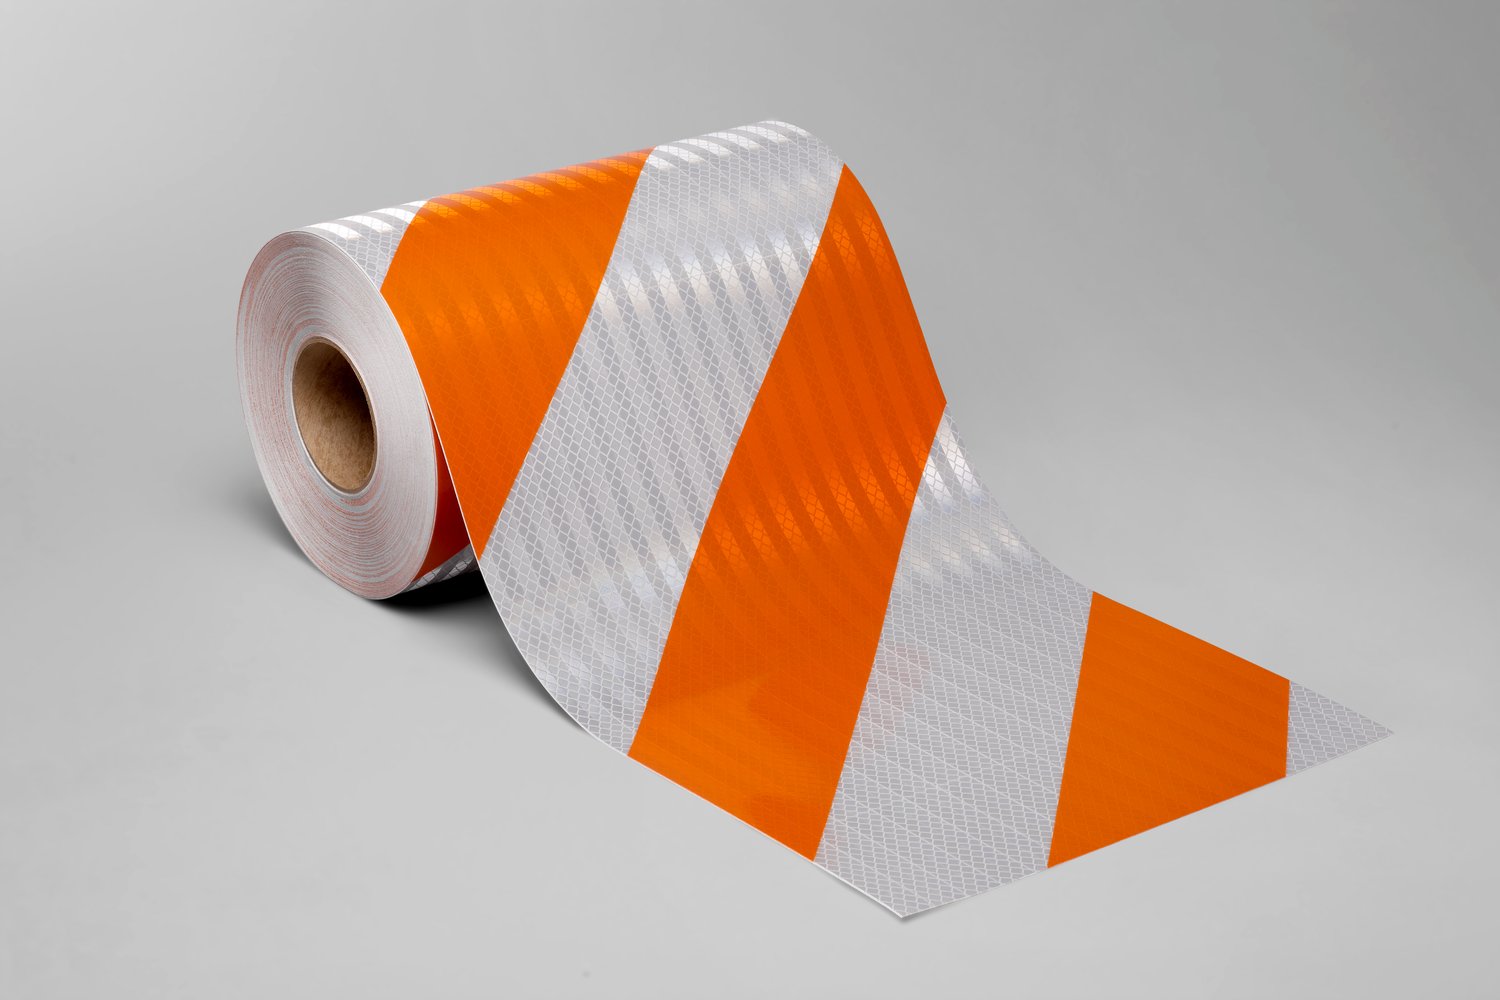 7010535189 - 3M Flexible Prismatic Reflective Barricade Sheeting 3336R Orange/White,
6 in stripe/right, 7 in x 100 yd